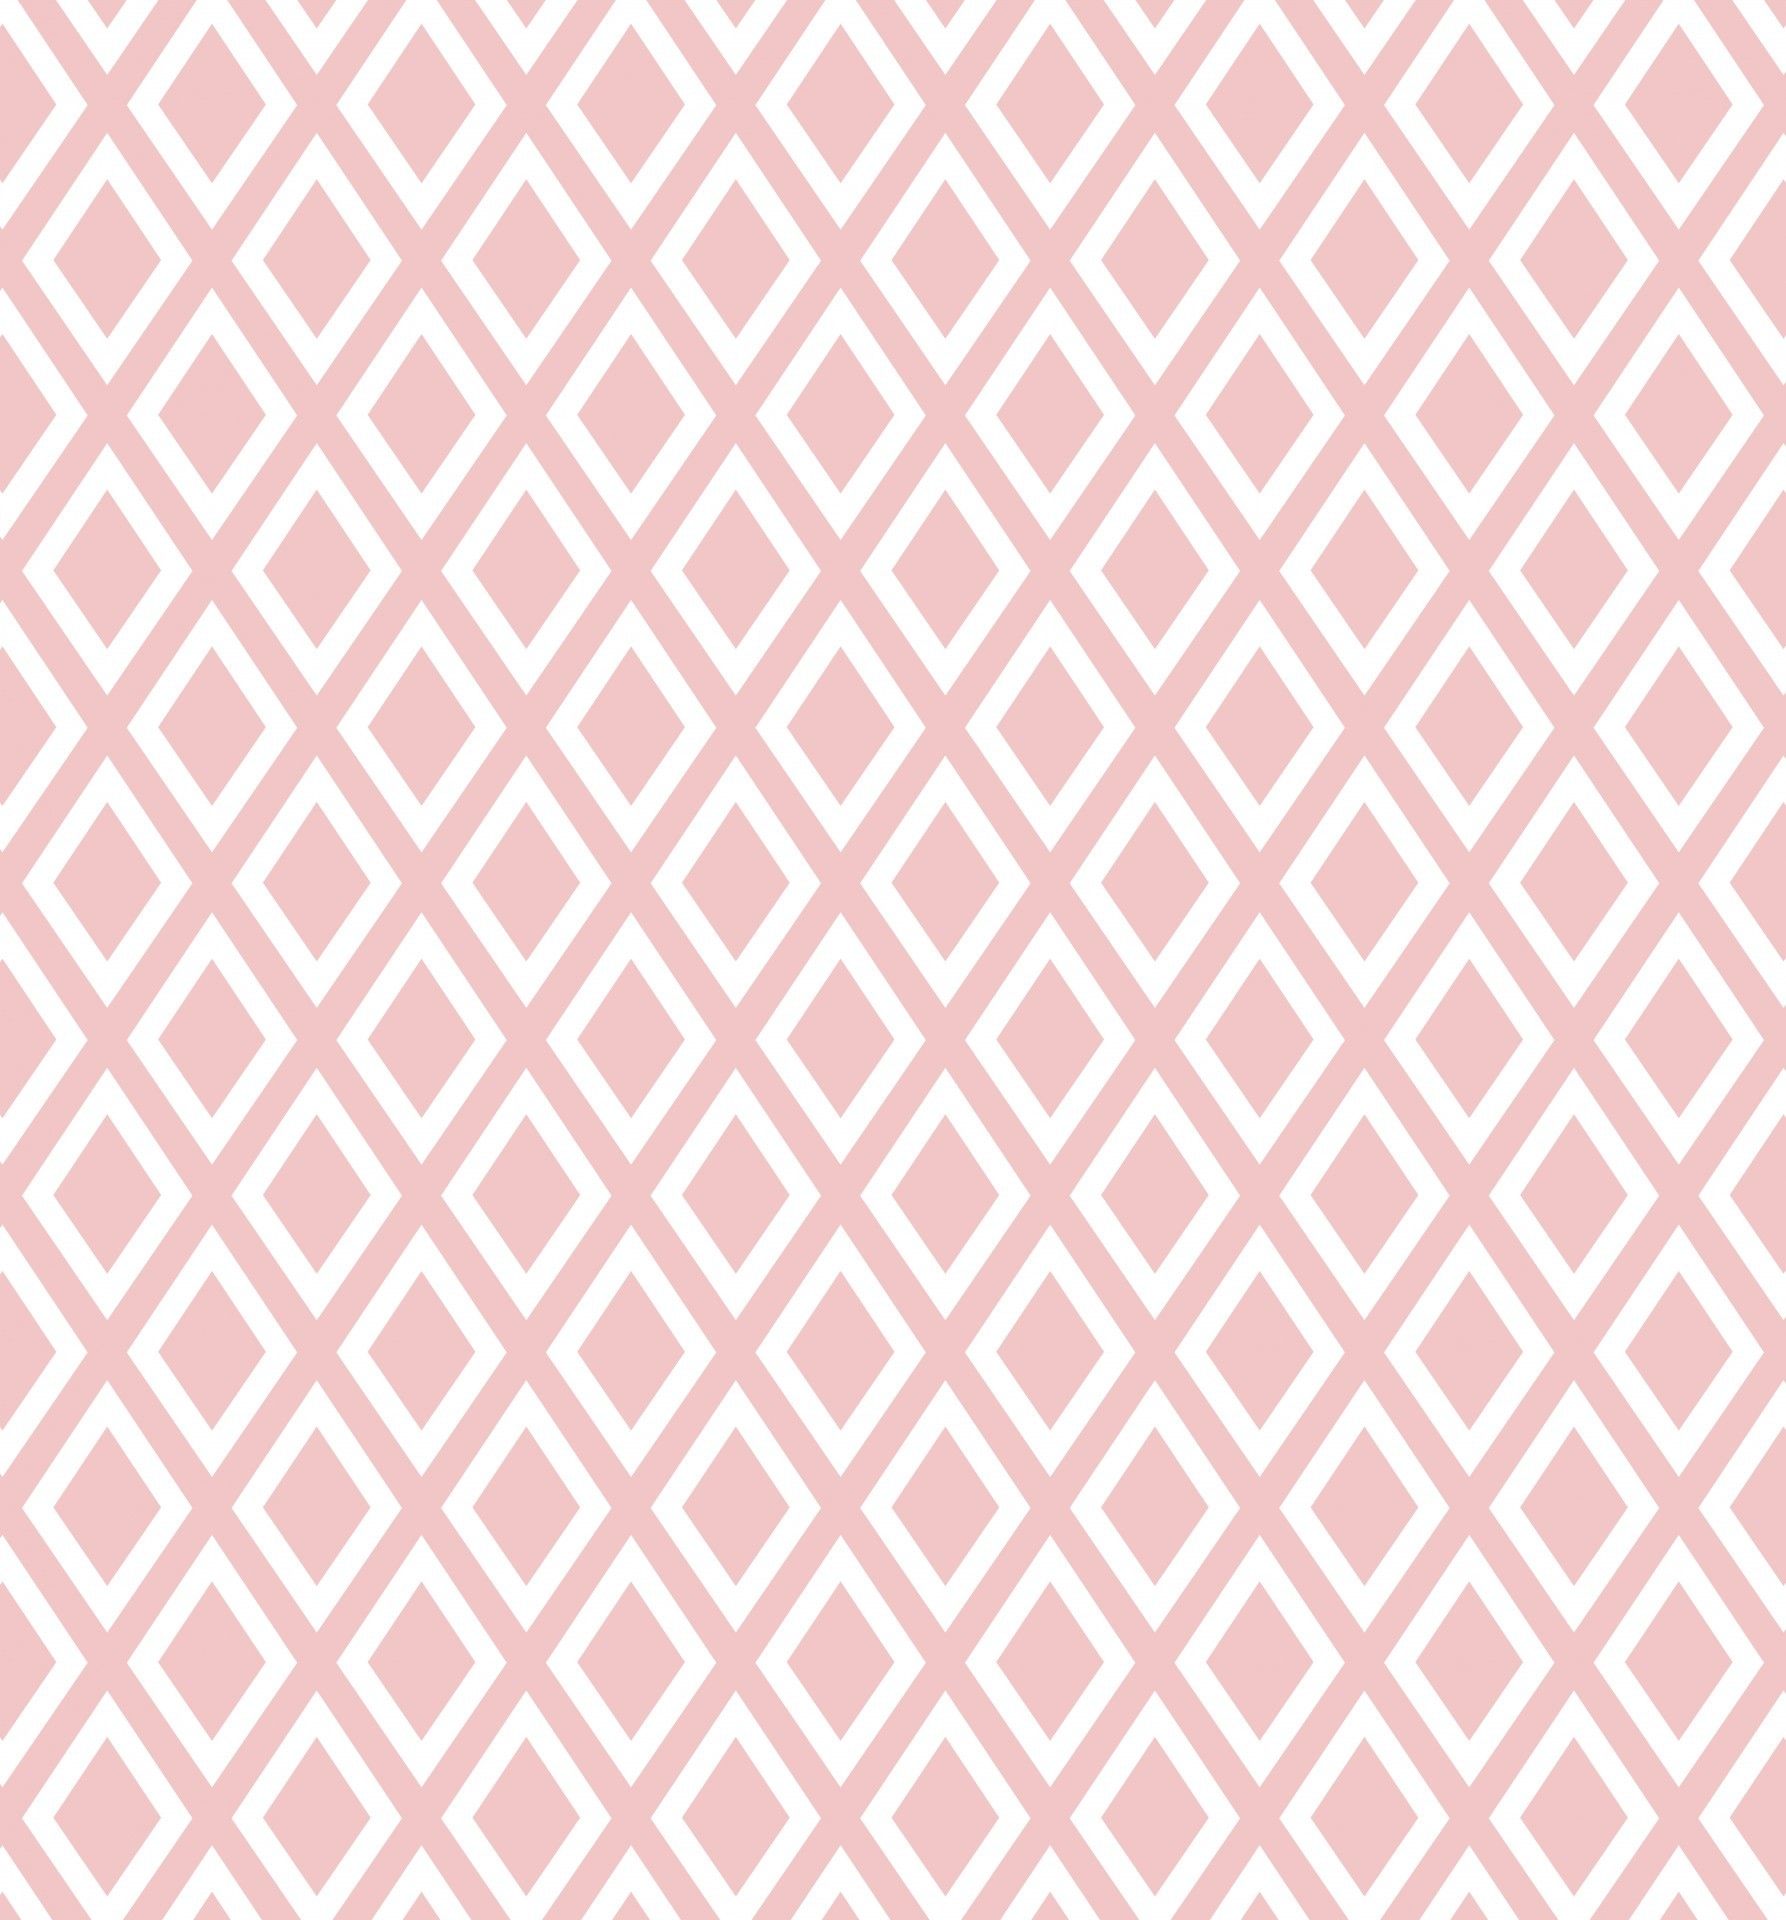 Pink Background With Quotes Patterns Cute For Website Aesthetic